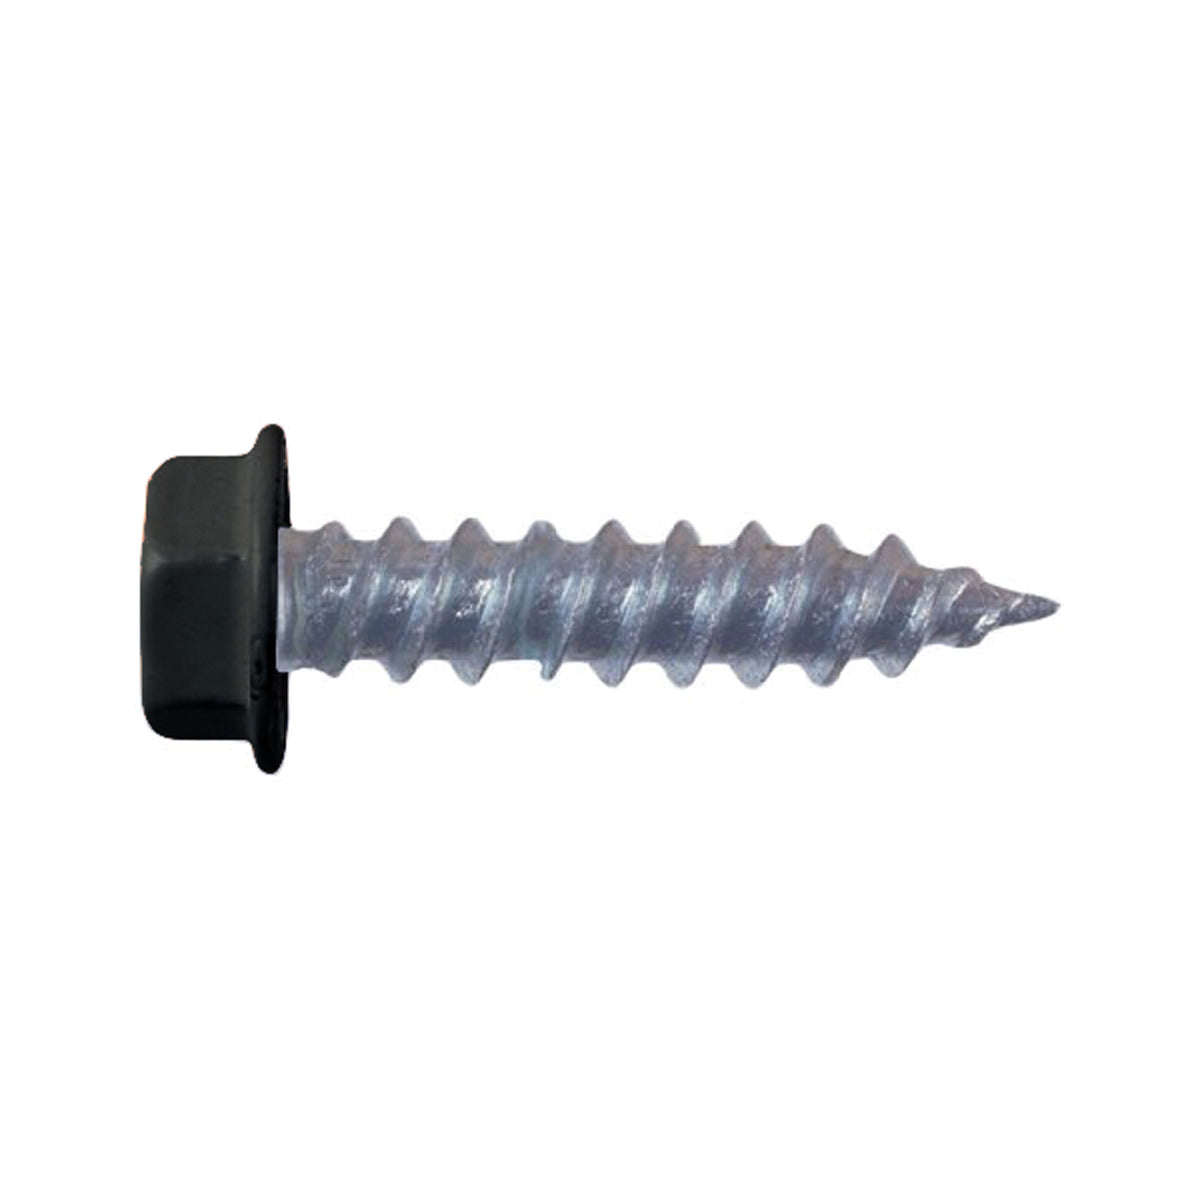 AP Products 012-TR500 BL 8 x 1 #8 Hex Washer Head Screw - 1", Black, Pack of 500